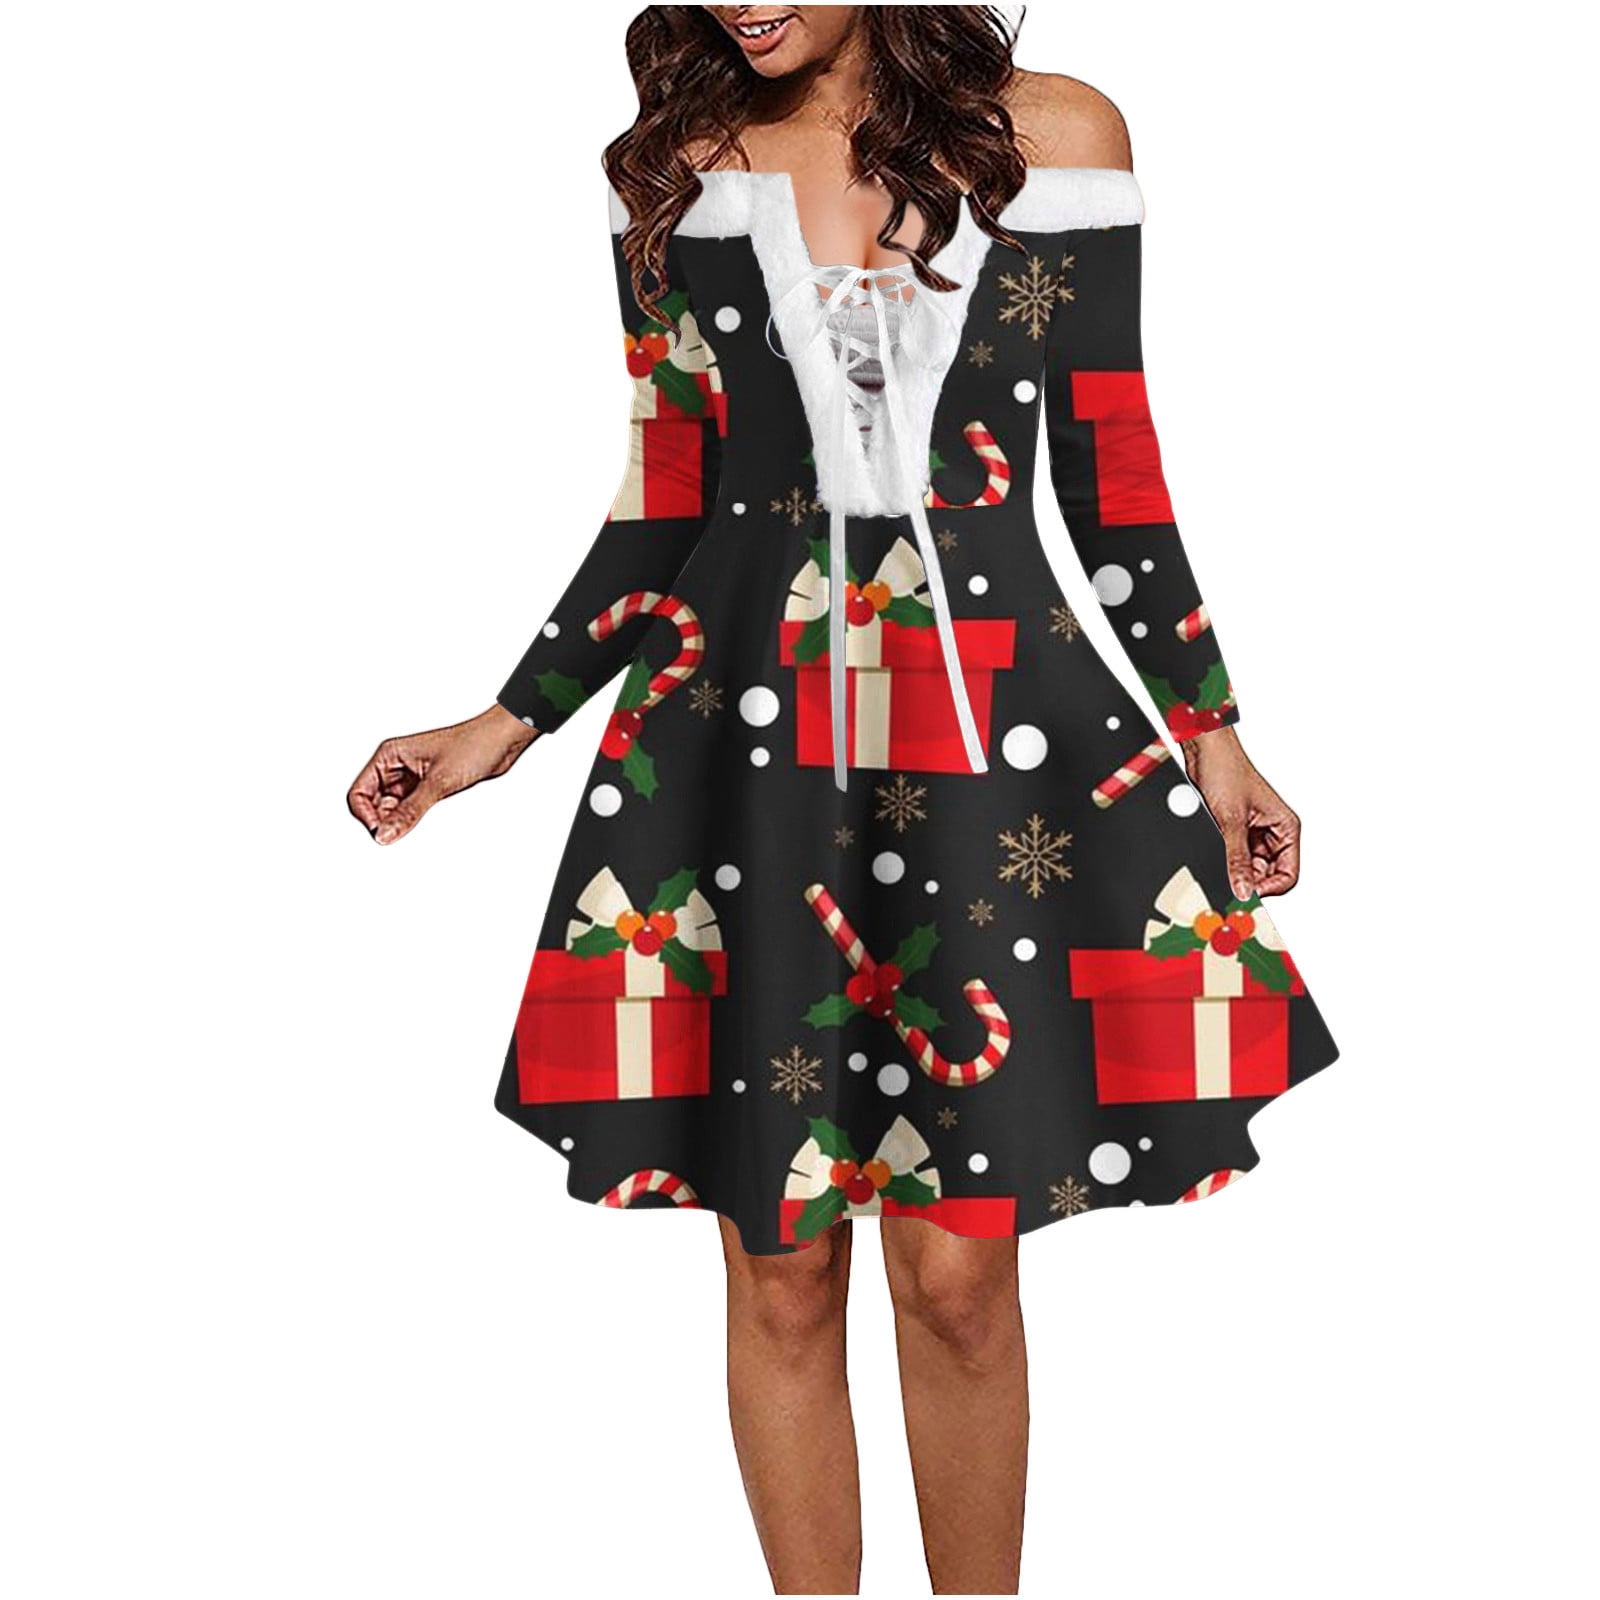  50 Cents Items, Funny Christmas Dresses For Women Cute